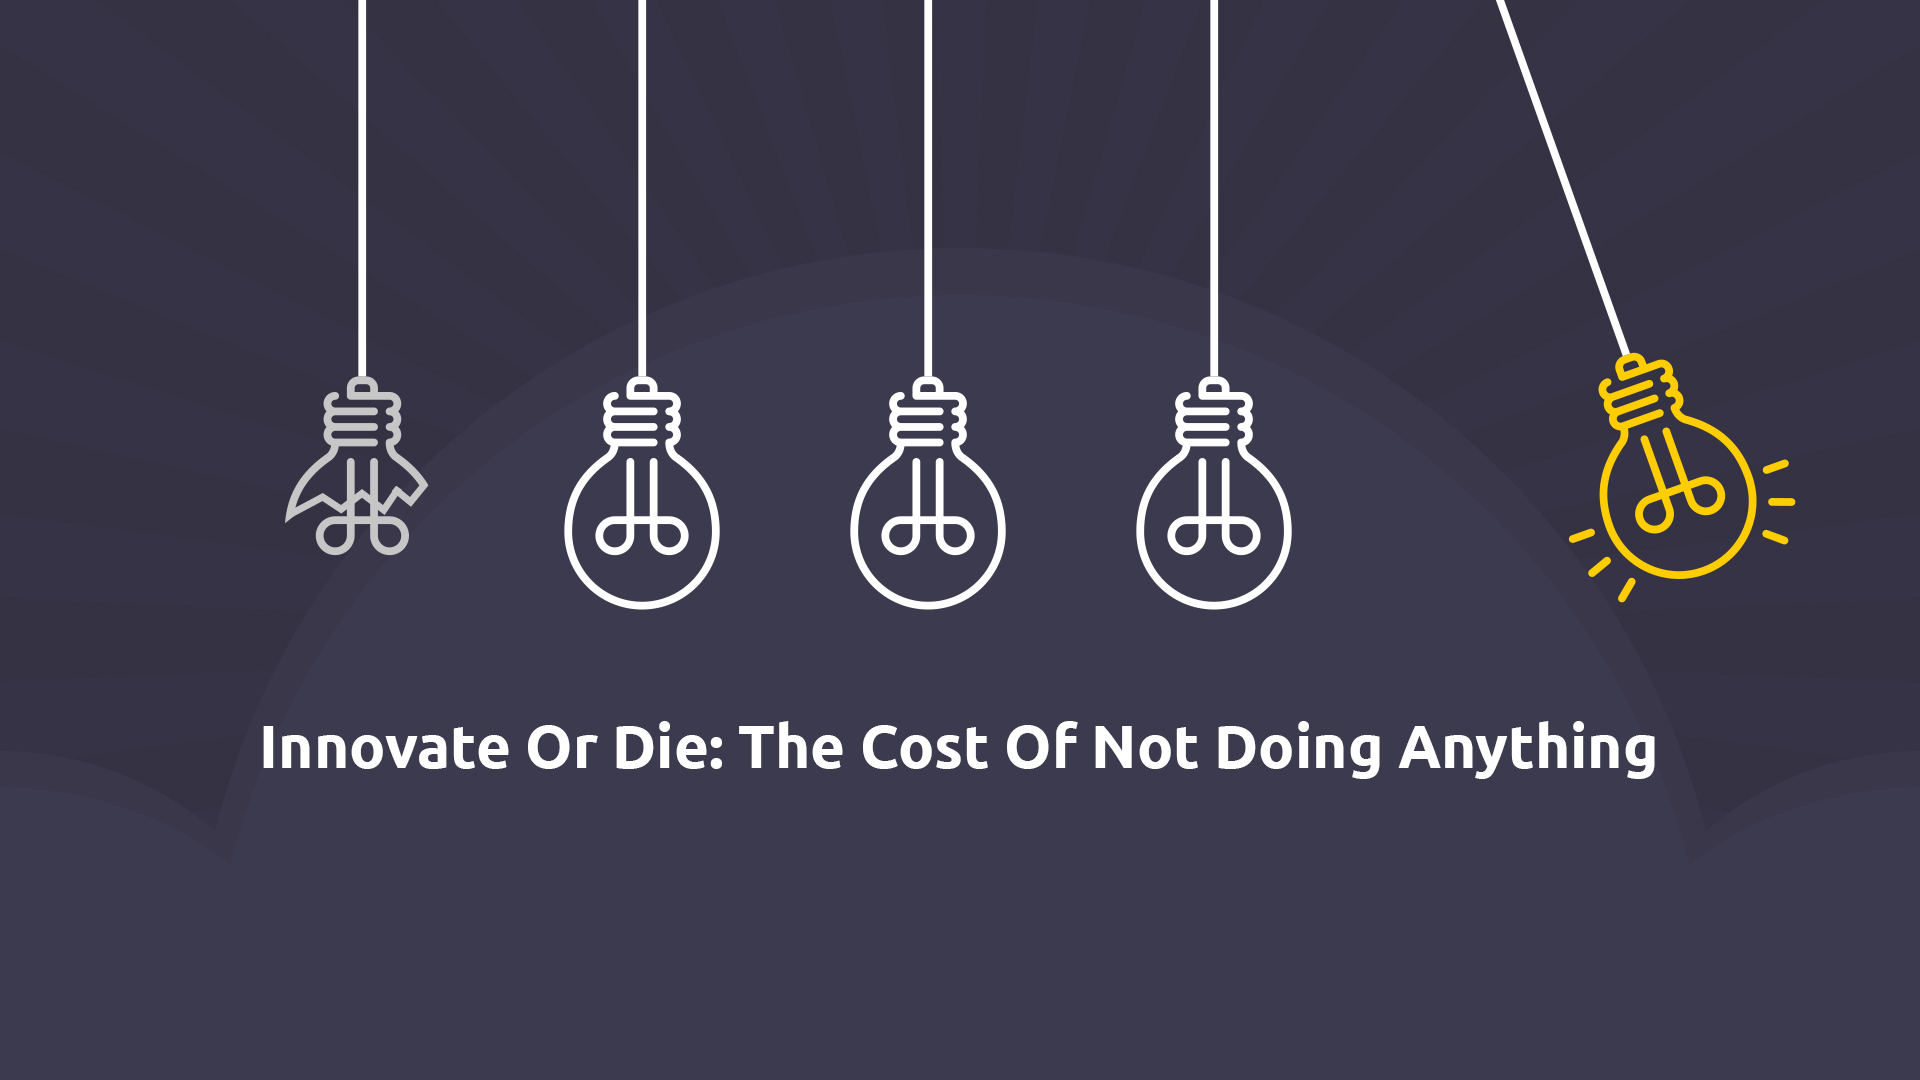 Innovate Or Die: The Cost Of Not Doing Anything